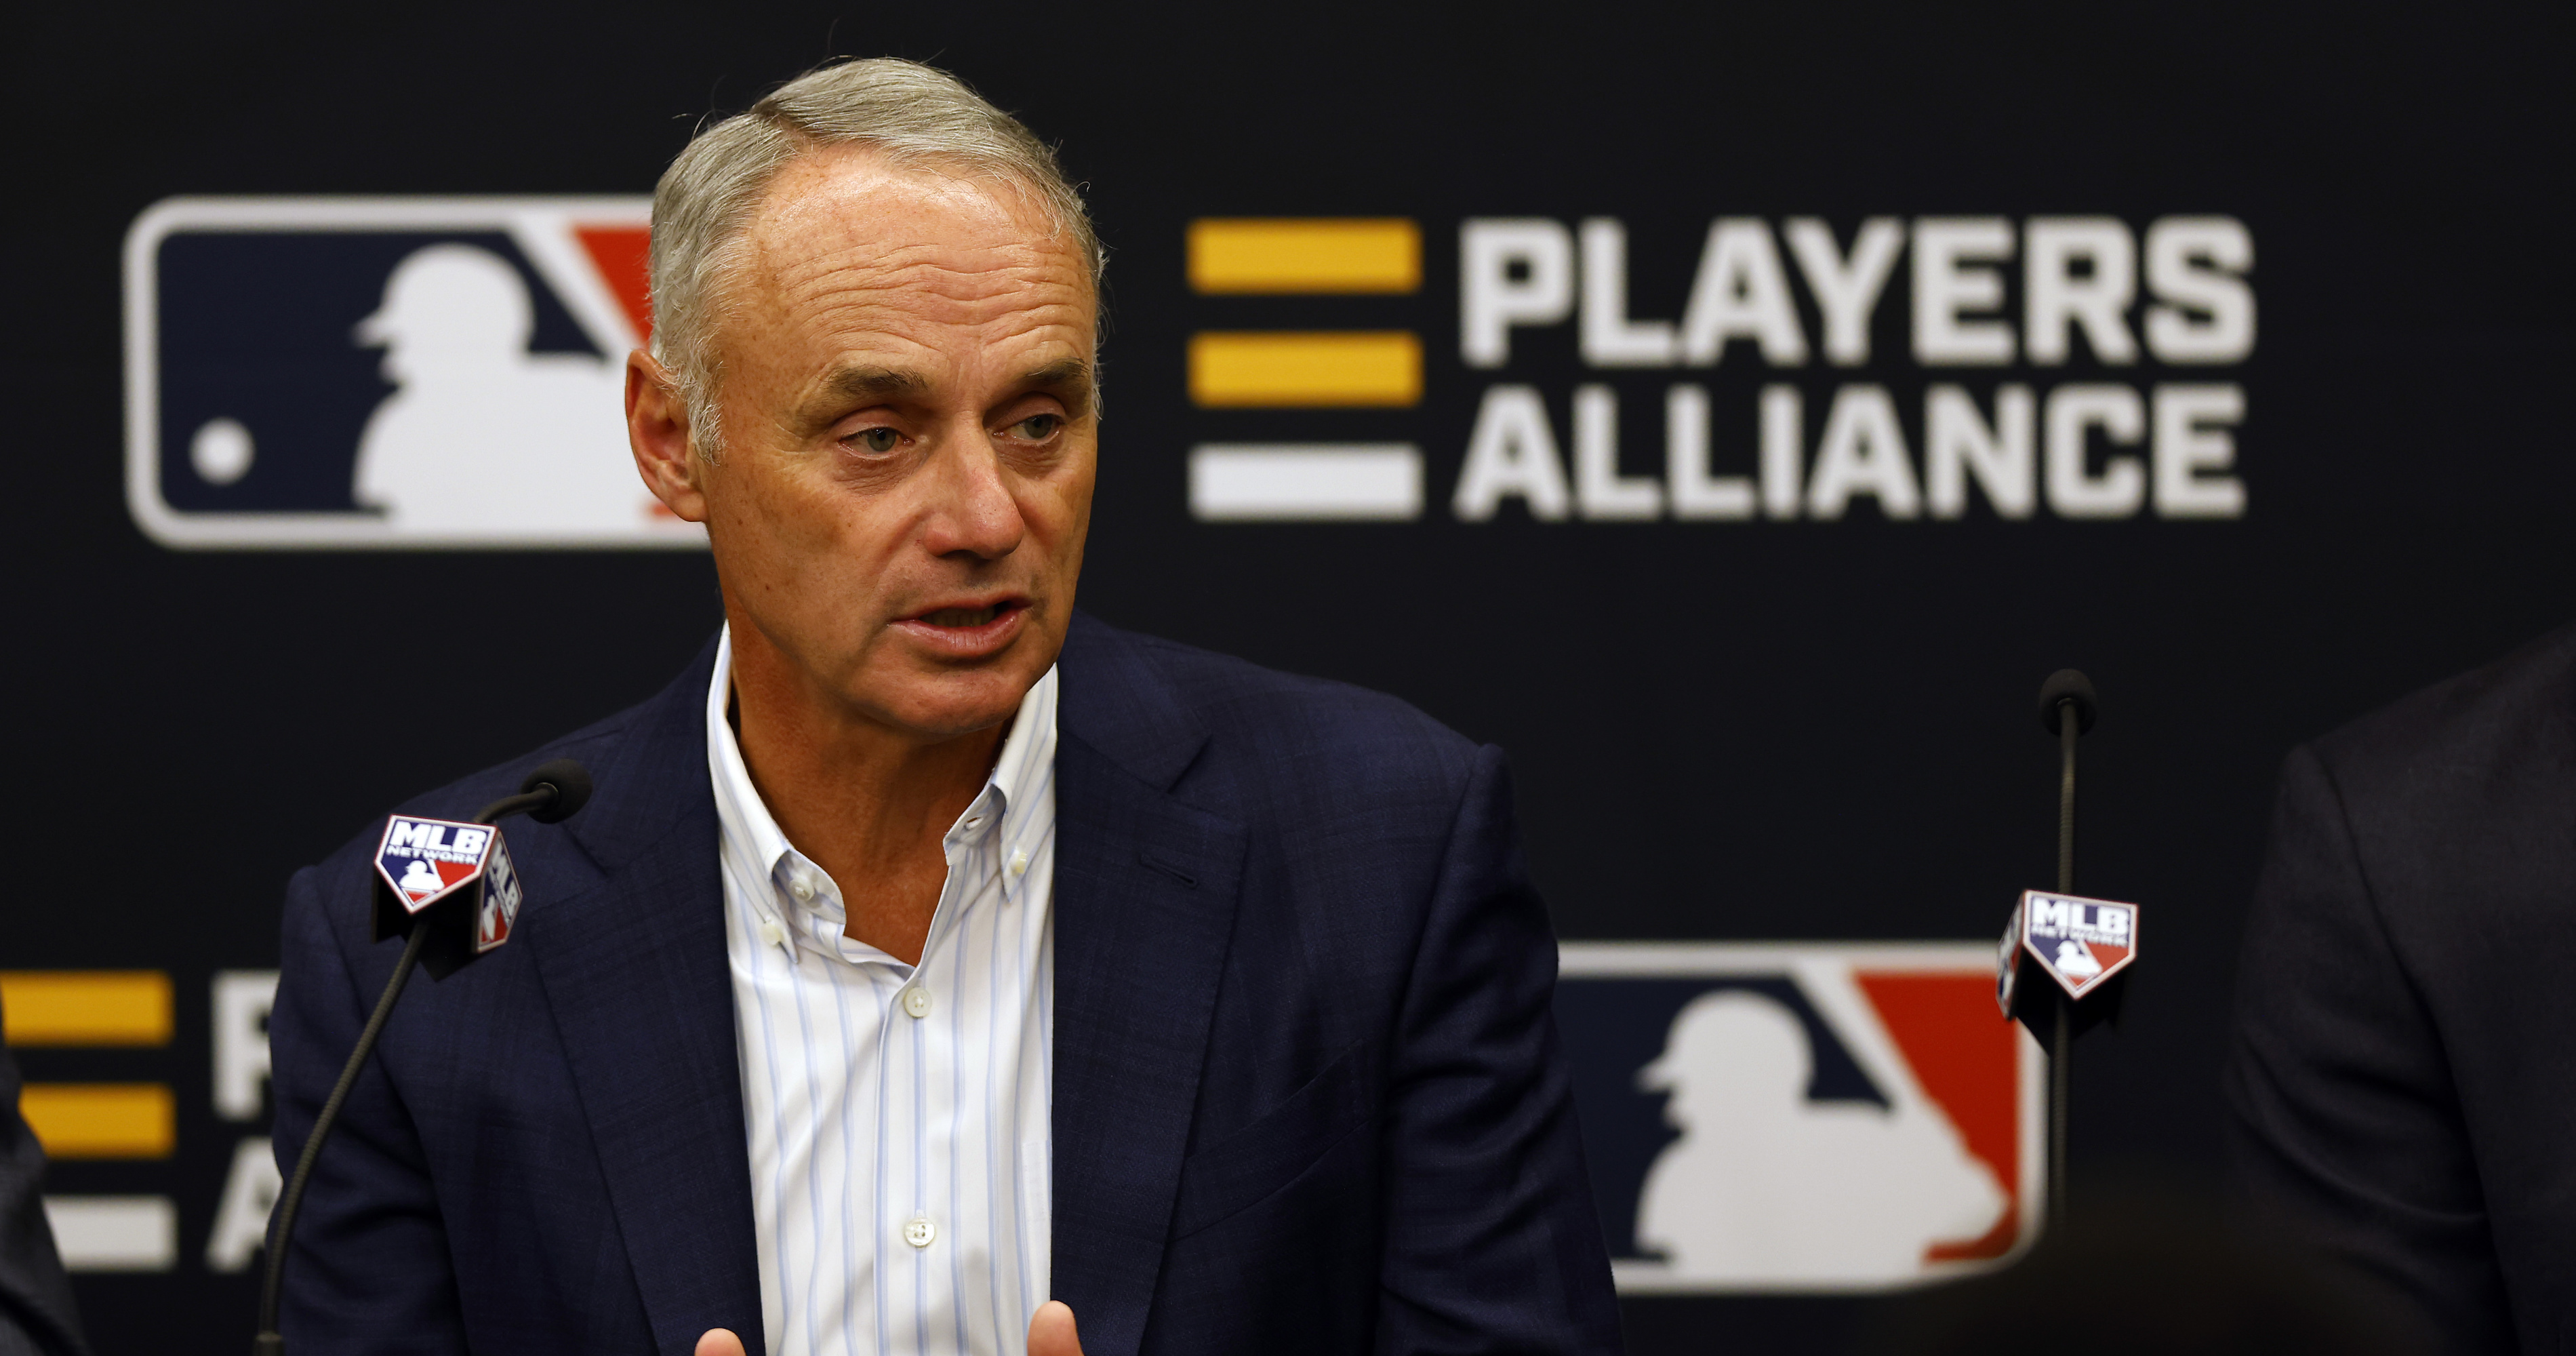 Universal DH, Limited Shifts and Other New Rules Could Move MLB